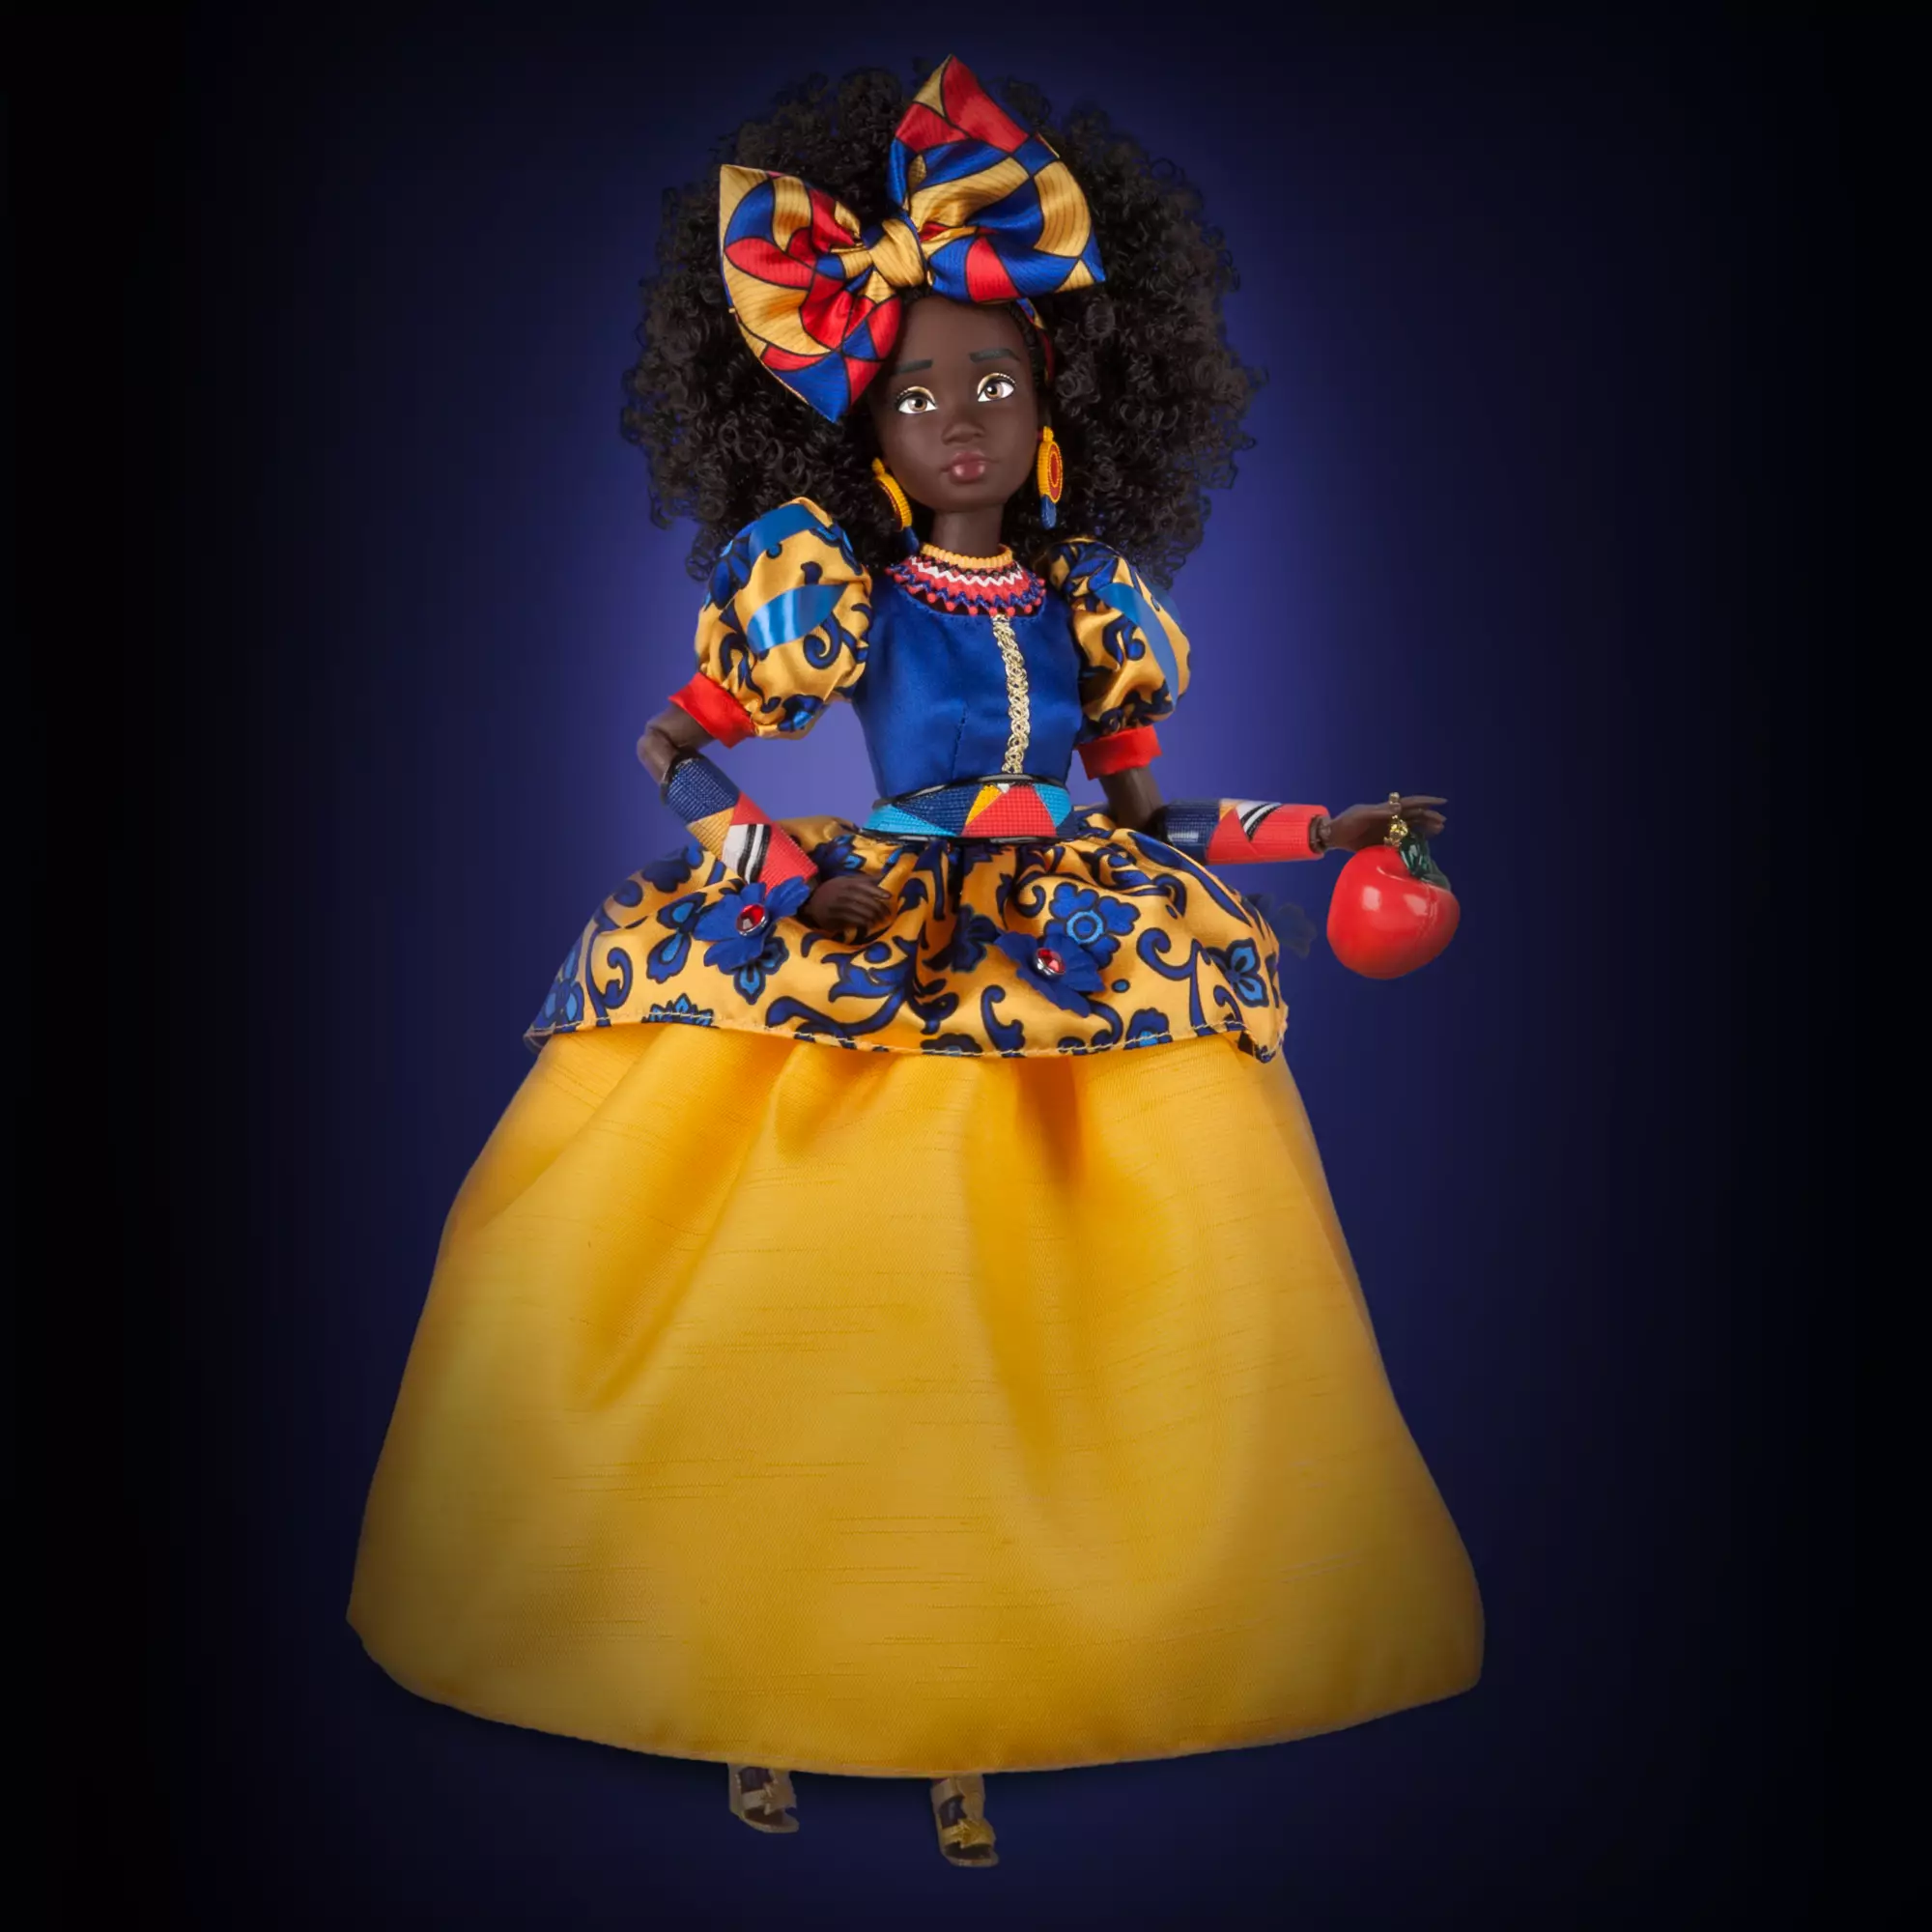 Disney and CreativeSoul launch collaboration on dolls inspired by Disney Princesses